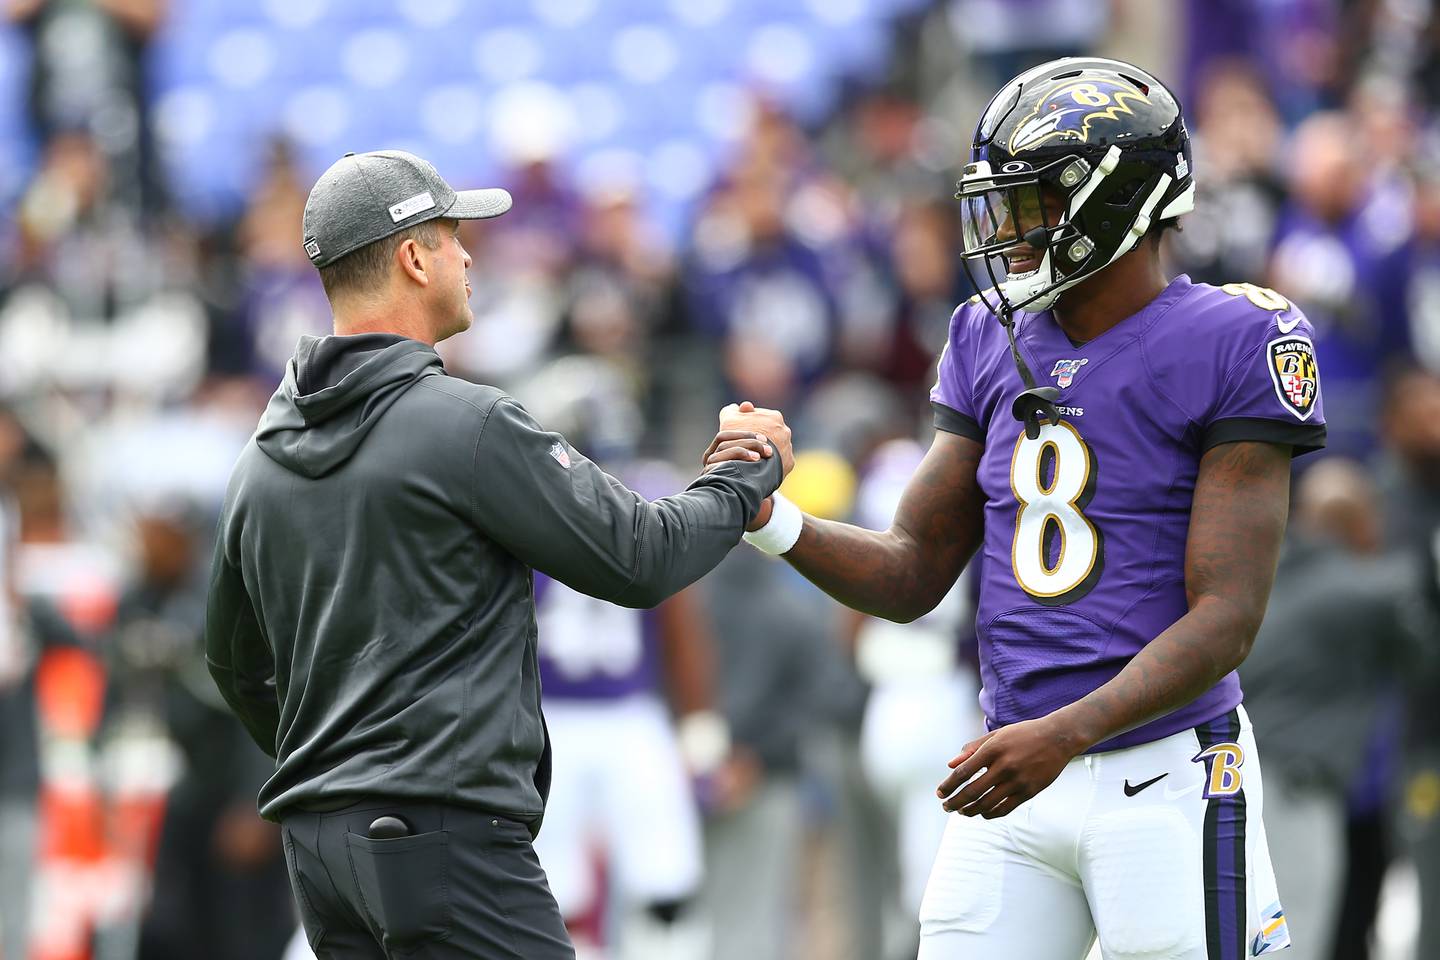 BALTIMORE, MD - OCTOBER 13: Head coach John Harbaugh interacts with Lamar Jackson #8 of the Baltimore Ravens prior to playing against the Cincinnati Bengals at M&T Bank Stadium on October 13, 2019 in Baltimore, Maryland.